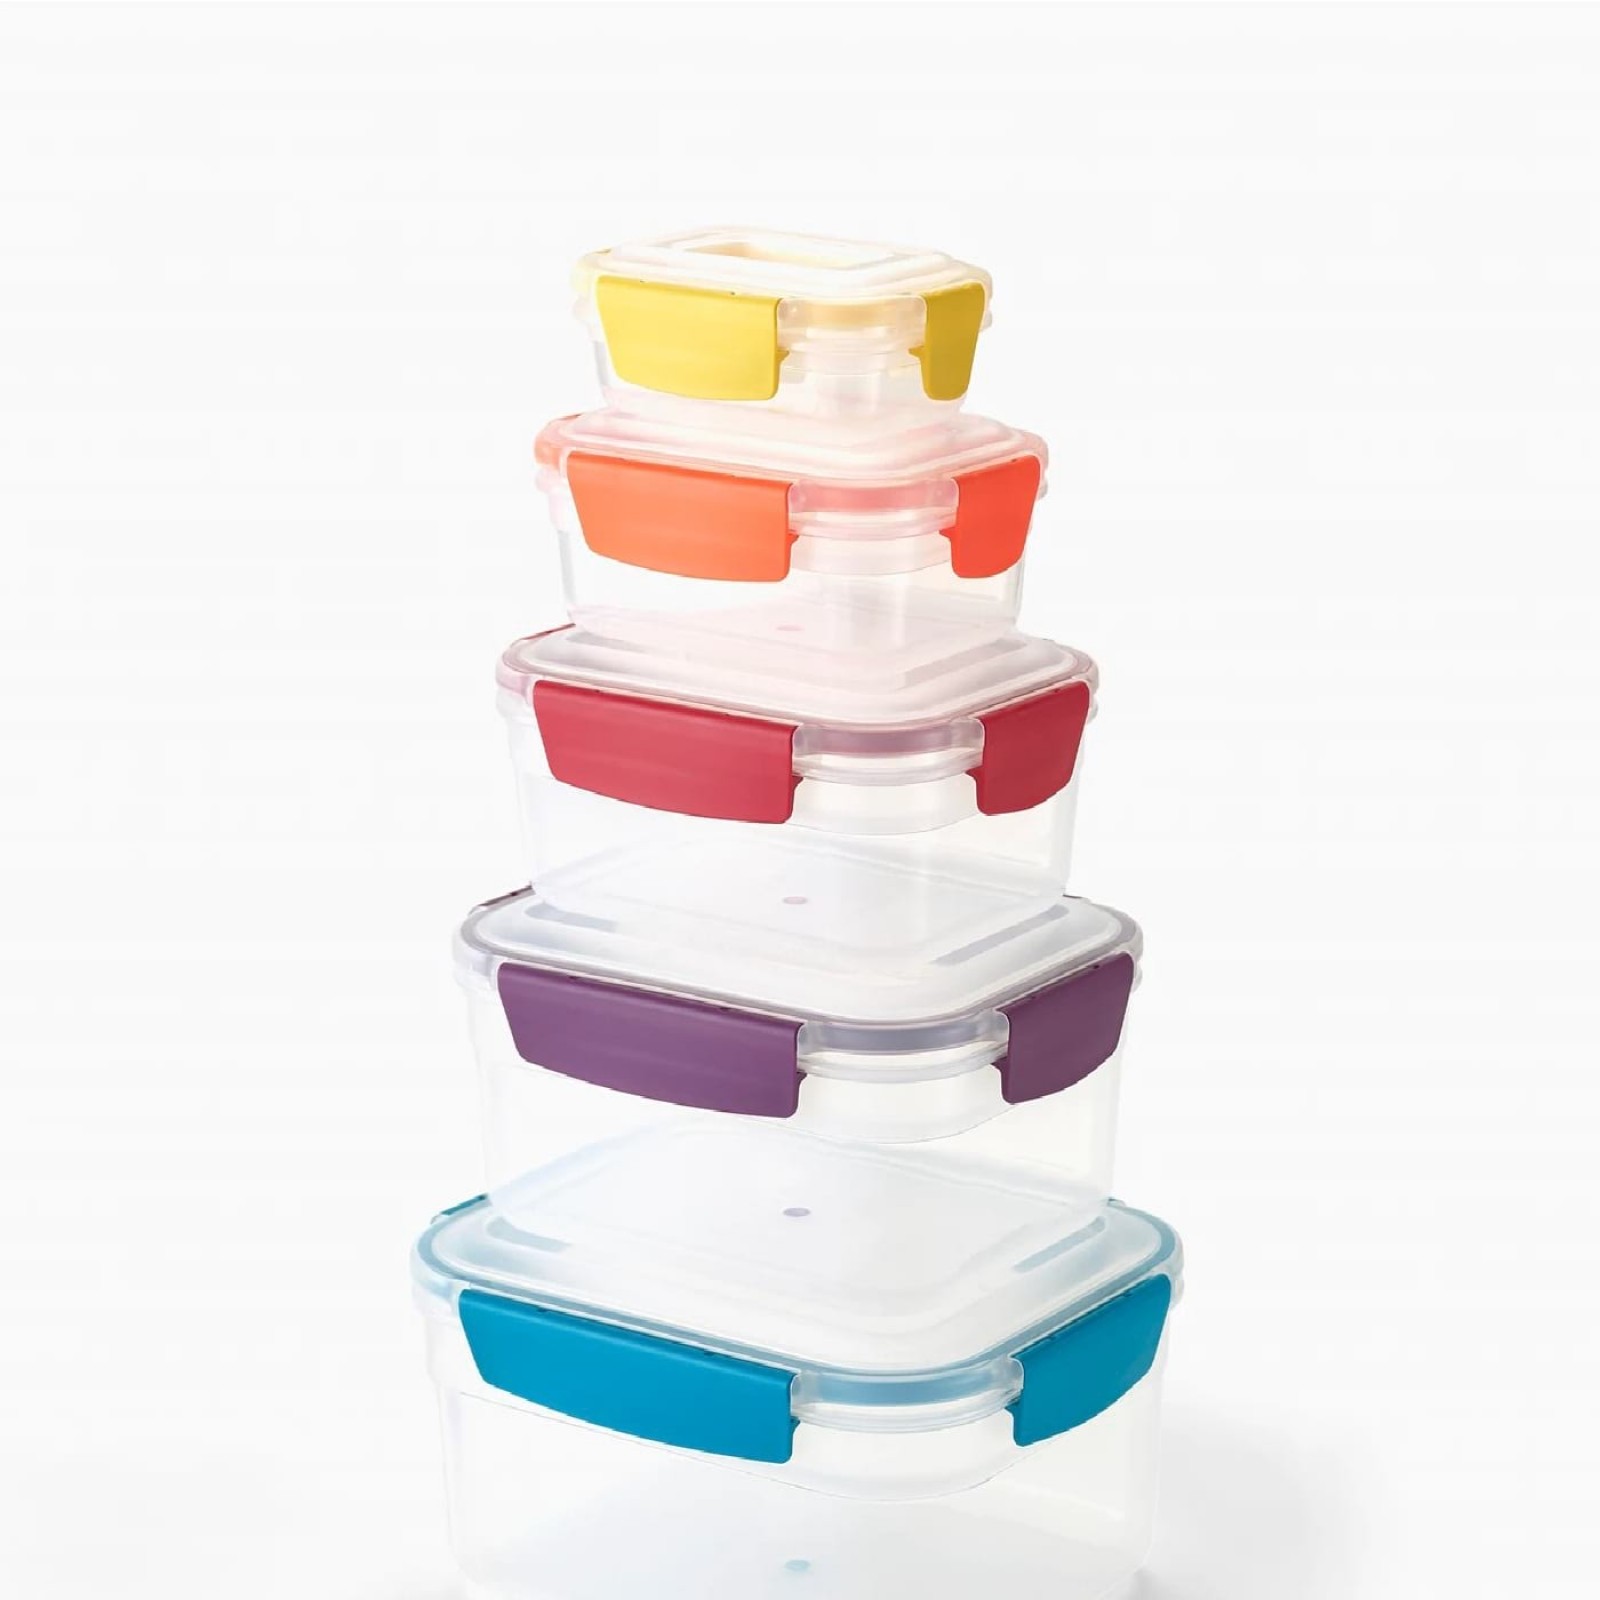 Joseph Joseph Dial 5 Piece Stage 2 Datable Baby Food Container Set